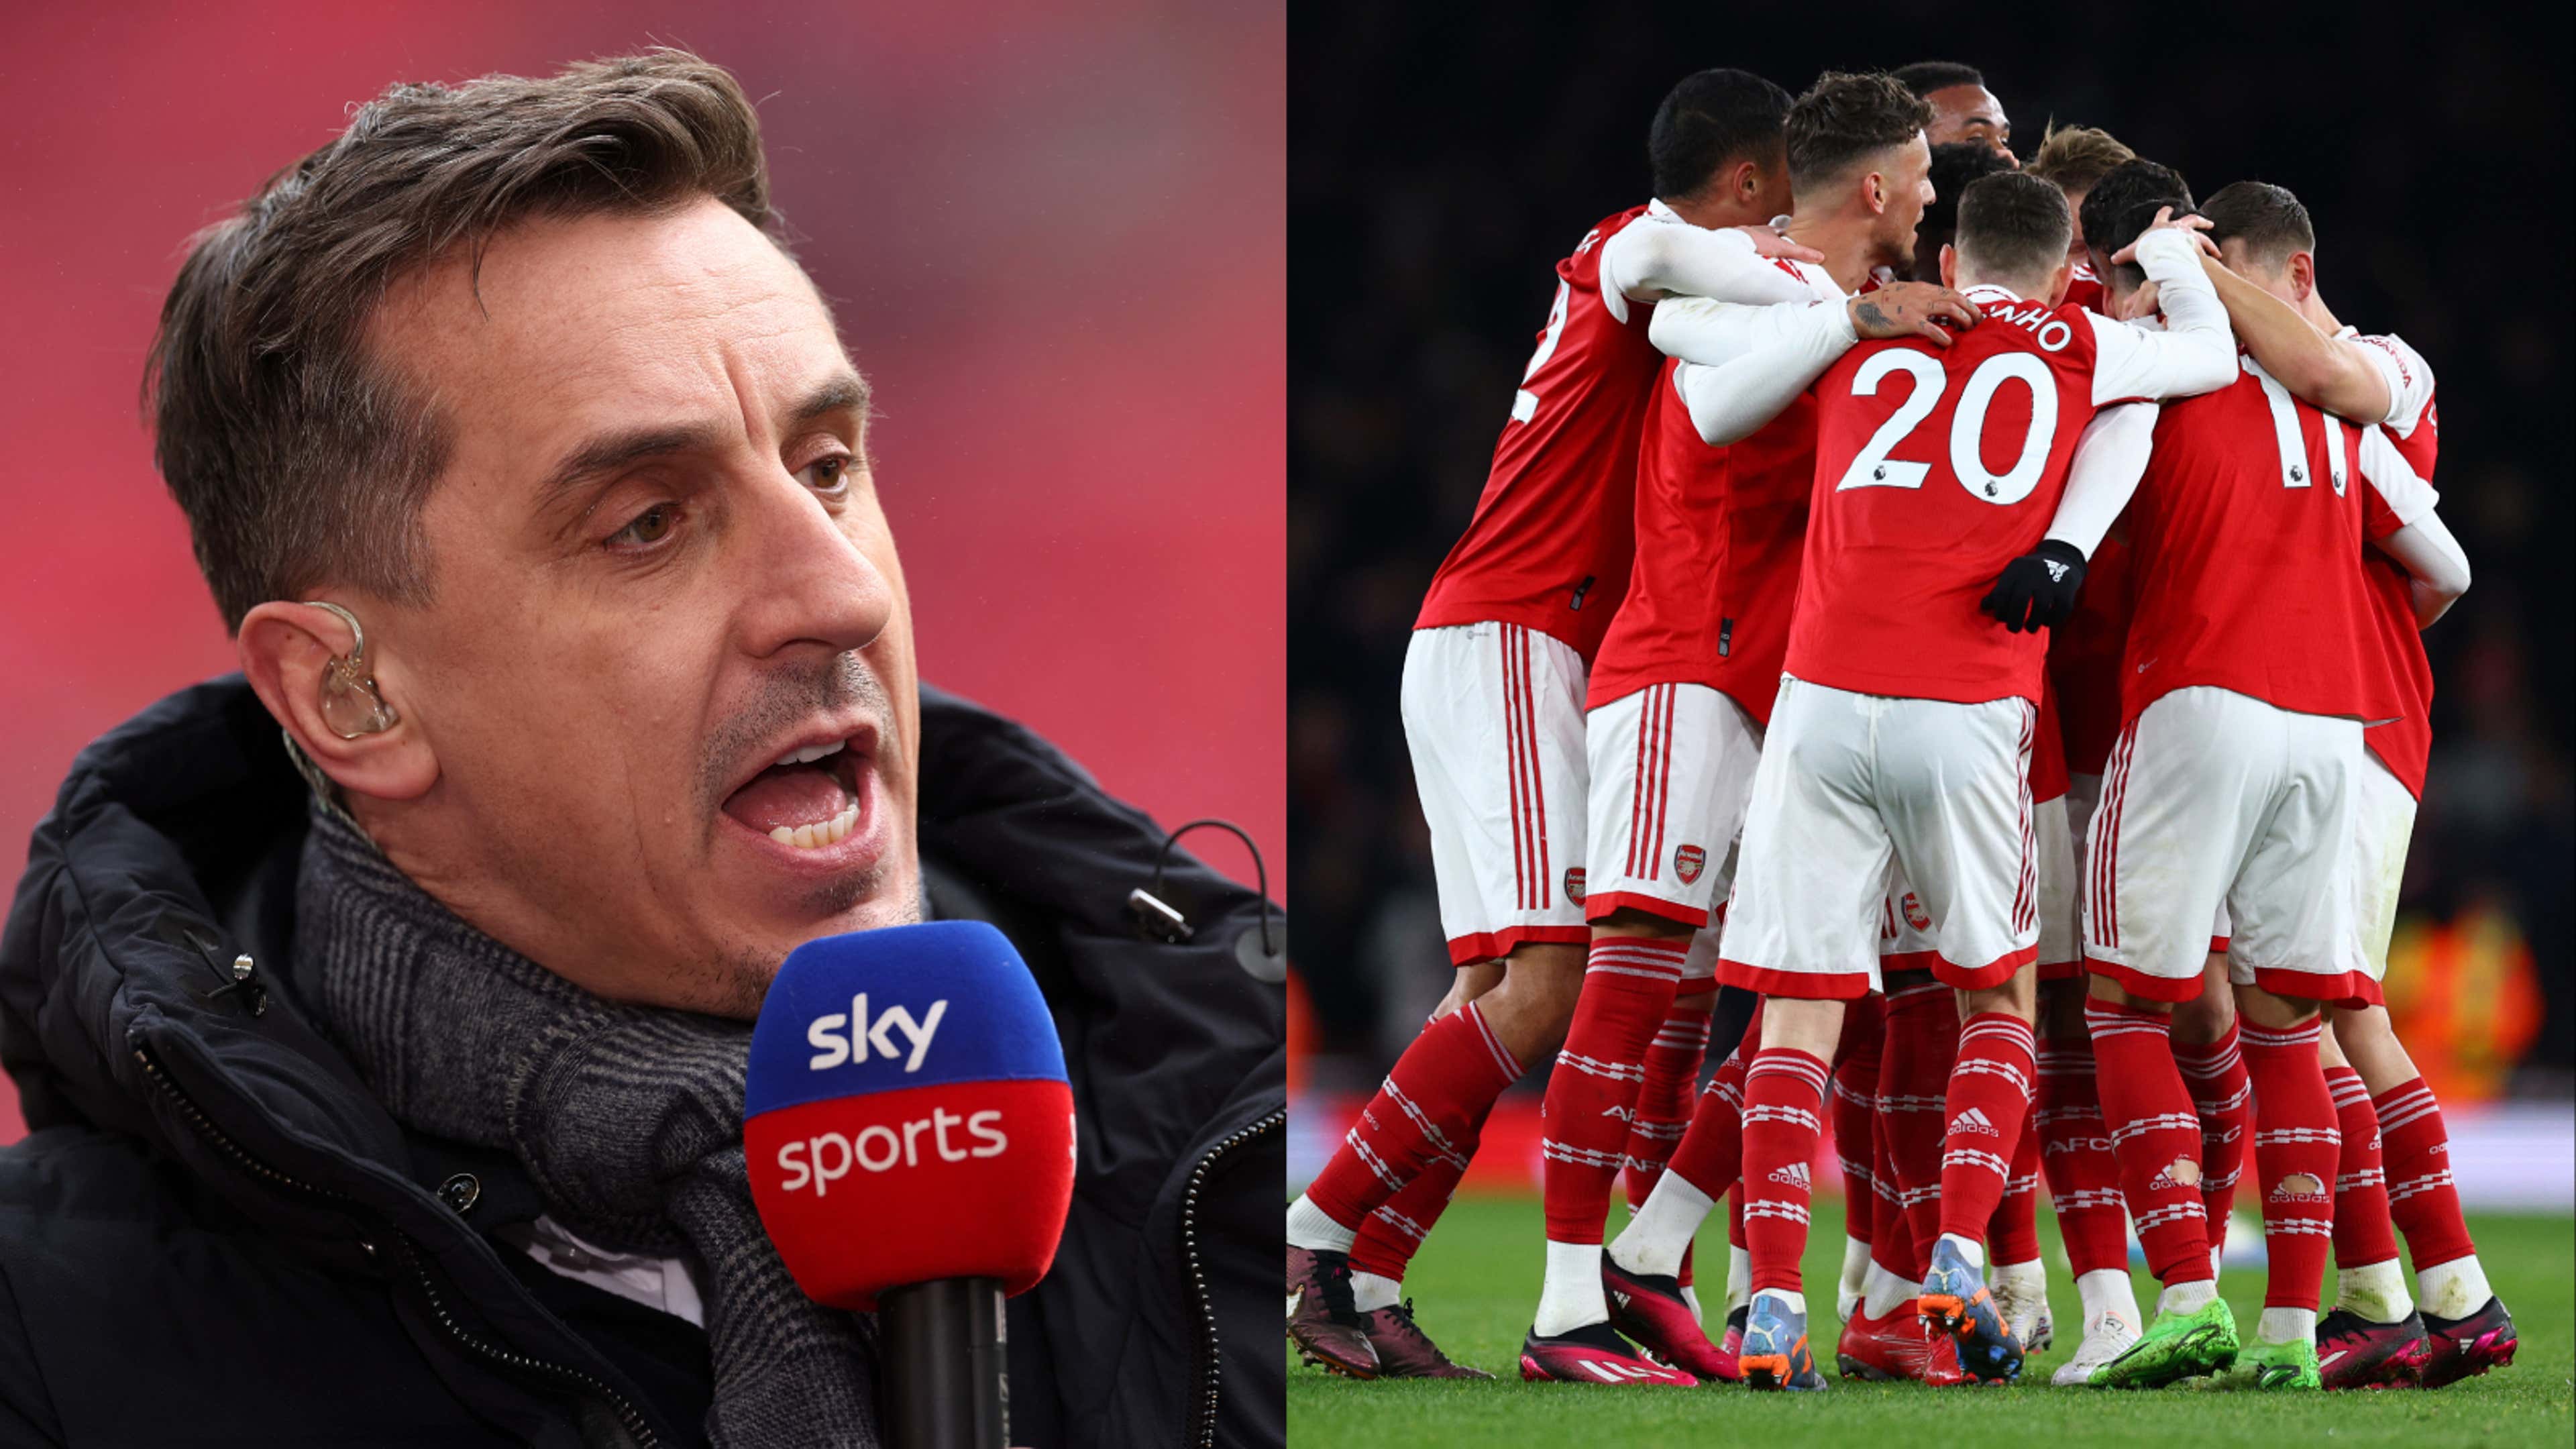 Gary Neville agrees to 'wear an Arsenal shirt saying champions' if